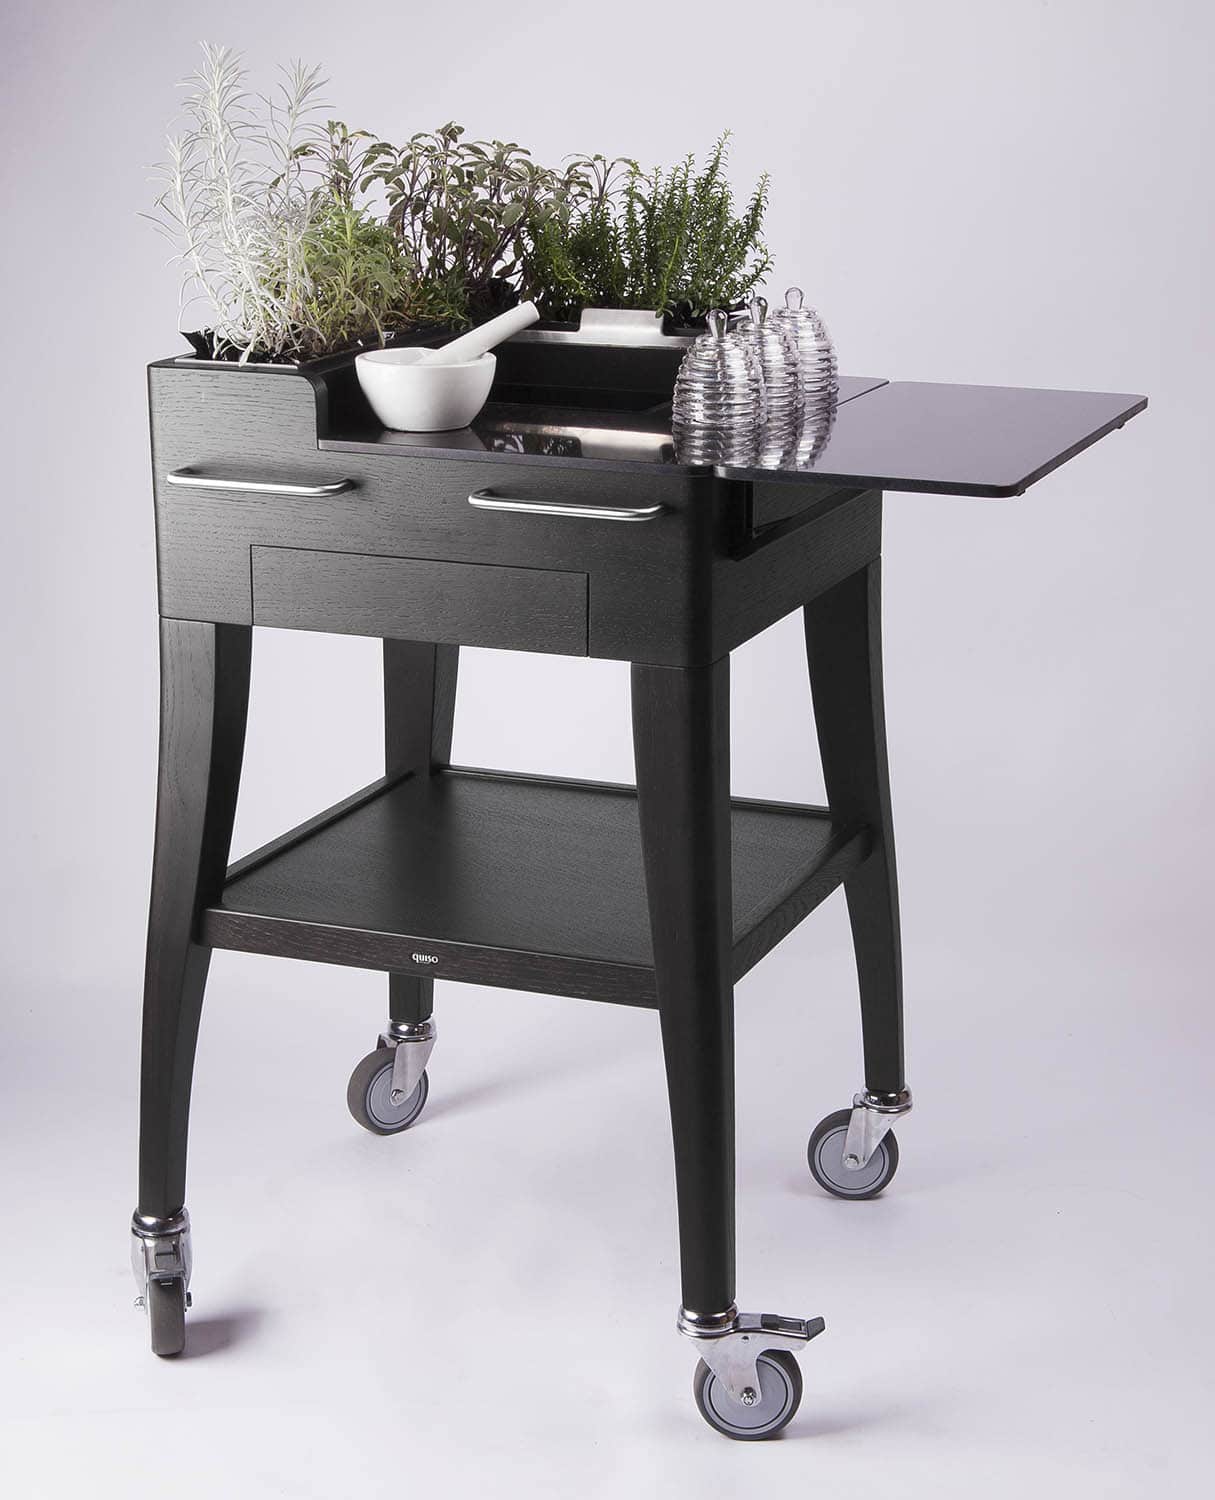 Tea and infusion trolley for fresh herbs, Jardin des infusions by QUISO in black oak, top and flap in black Quartz stone with integrated mortar and honey pots